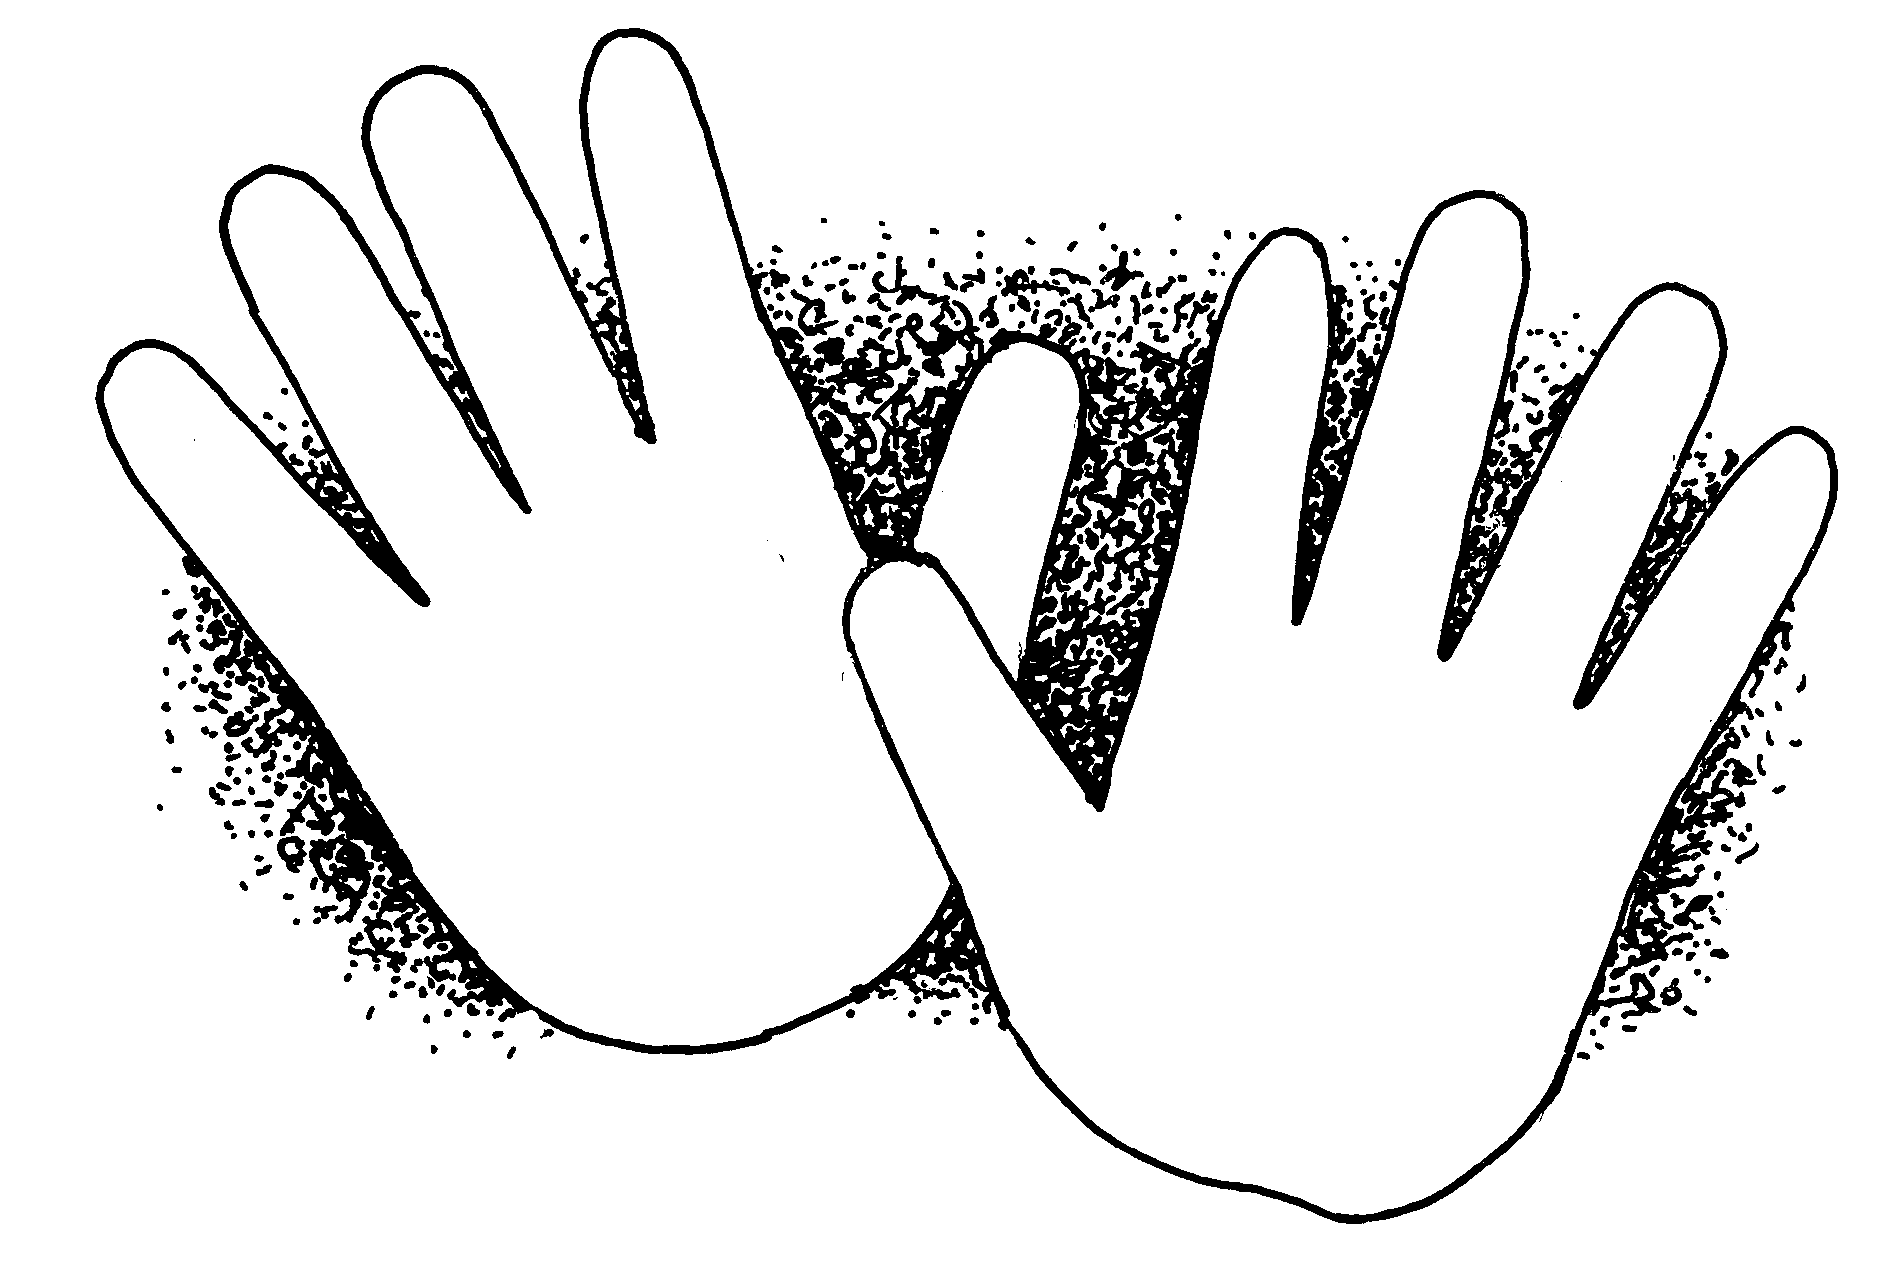 open hands clip art black and white